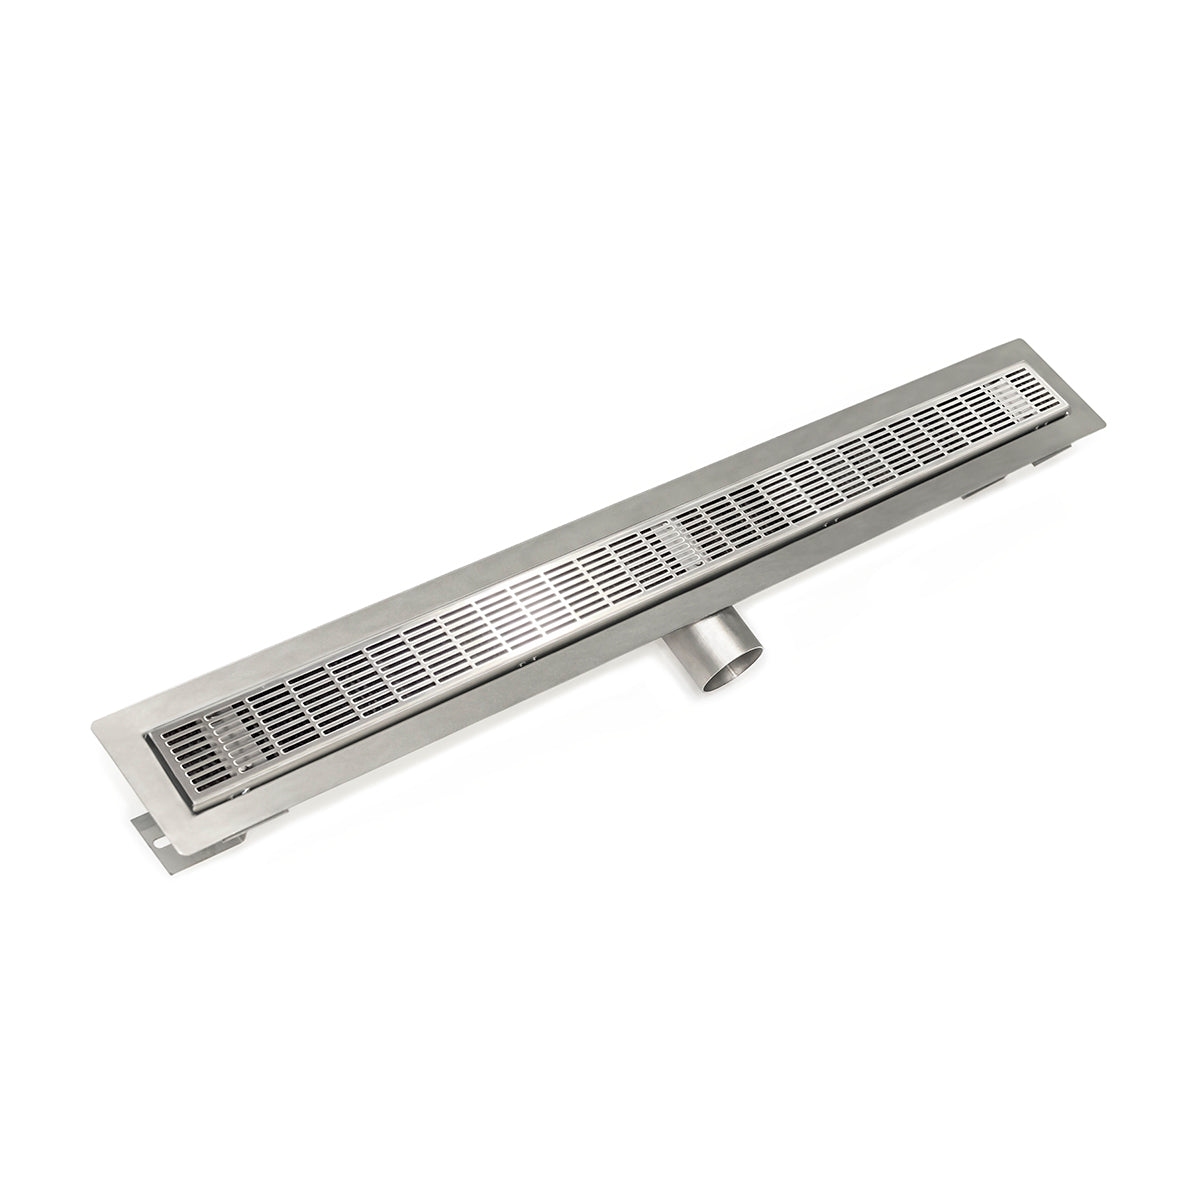 Infinity Drain 48" FT Series Side Outlet Linear Drain Kit with 2 1/2" Perforated Slotted Grate